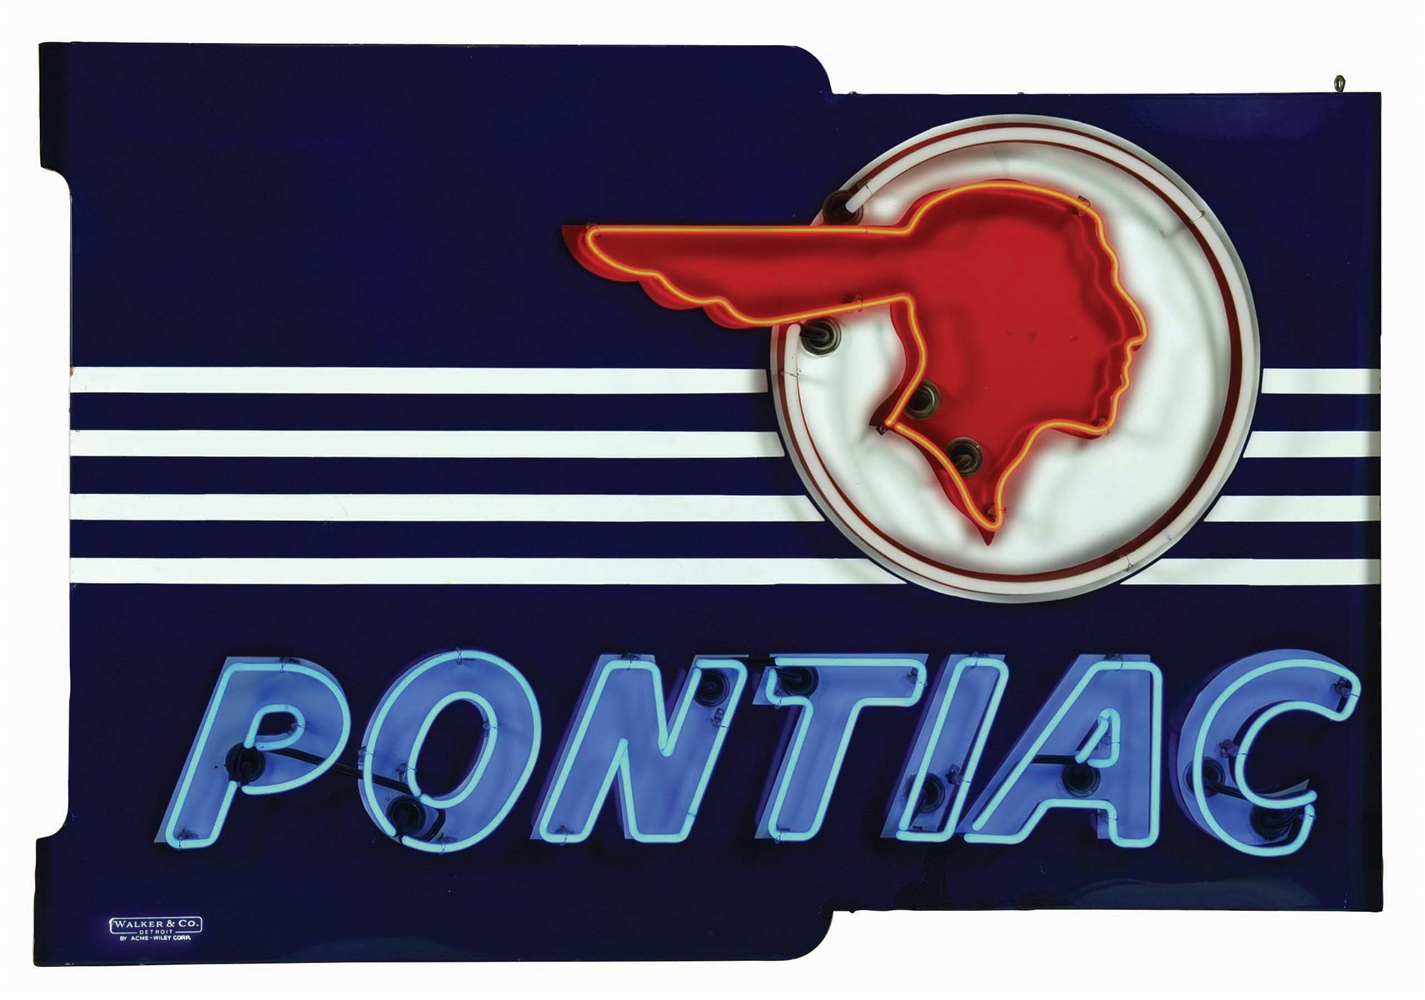 PONTIAC AUTOMOBILES DIE CUT PORCELAIN NEON SIGN W/ FULL FEATHER NATIVE AMERICAN GRAPHIC. 